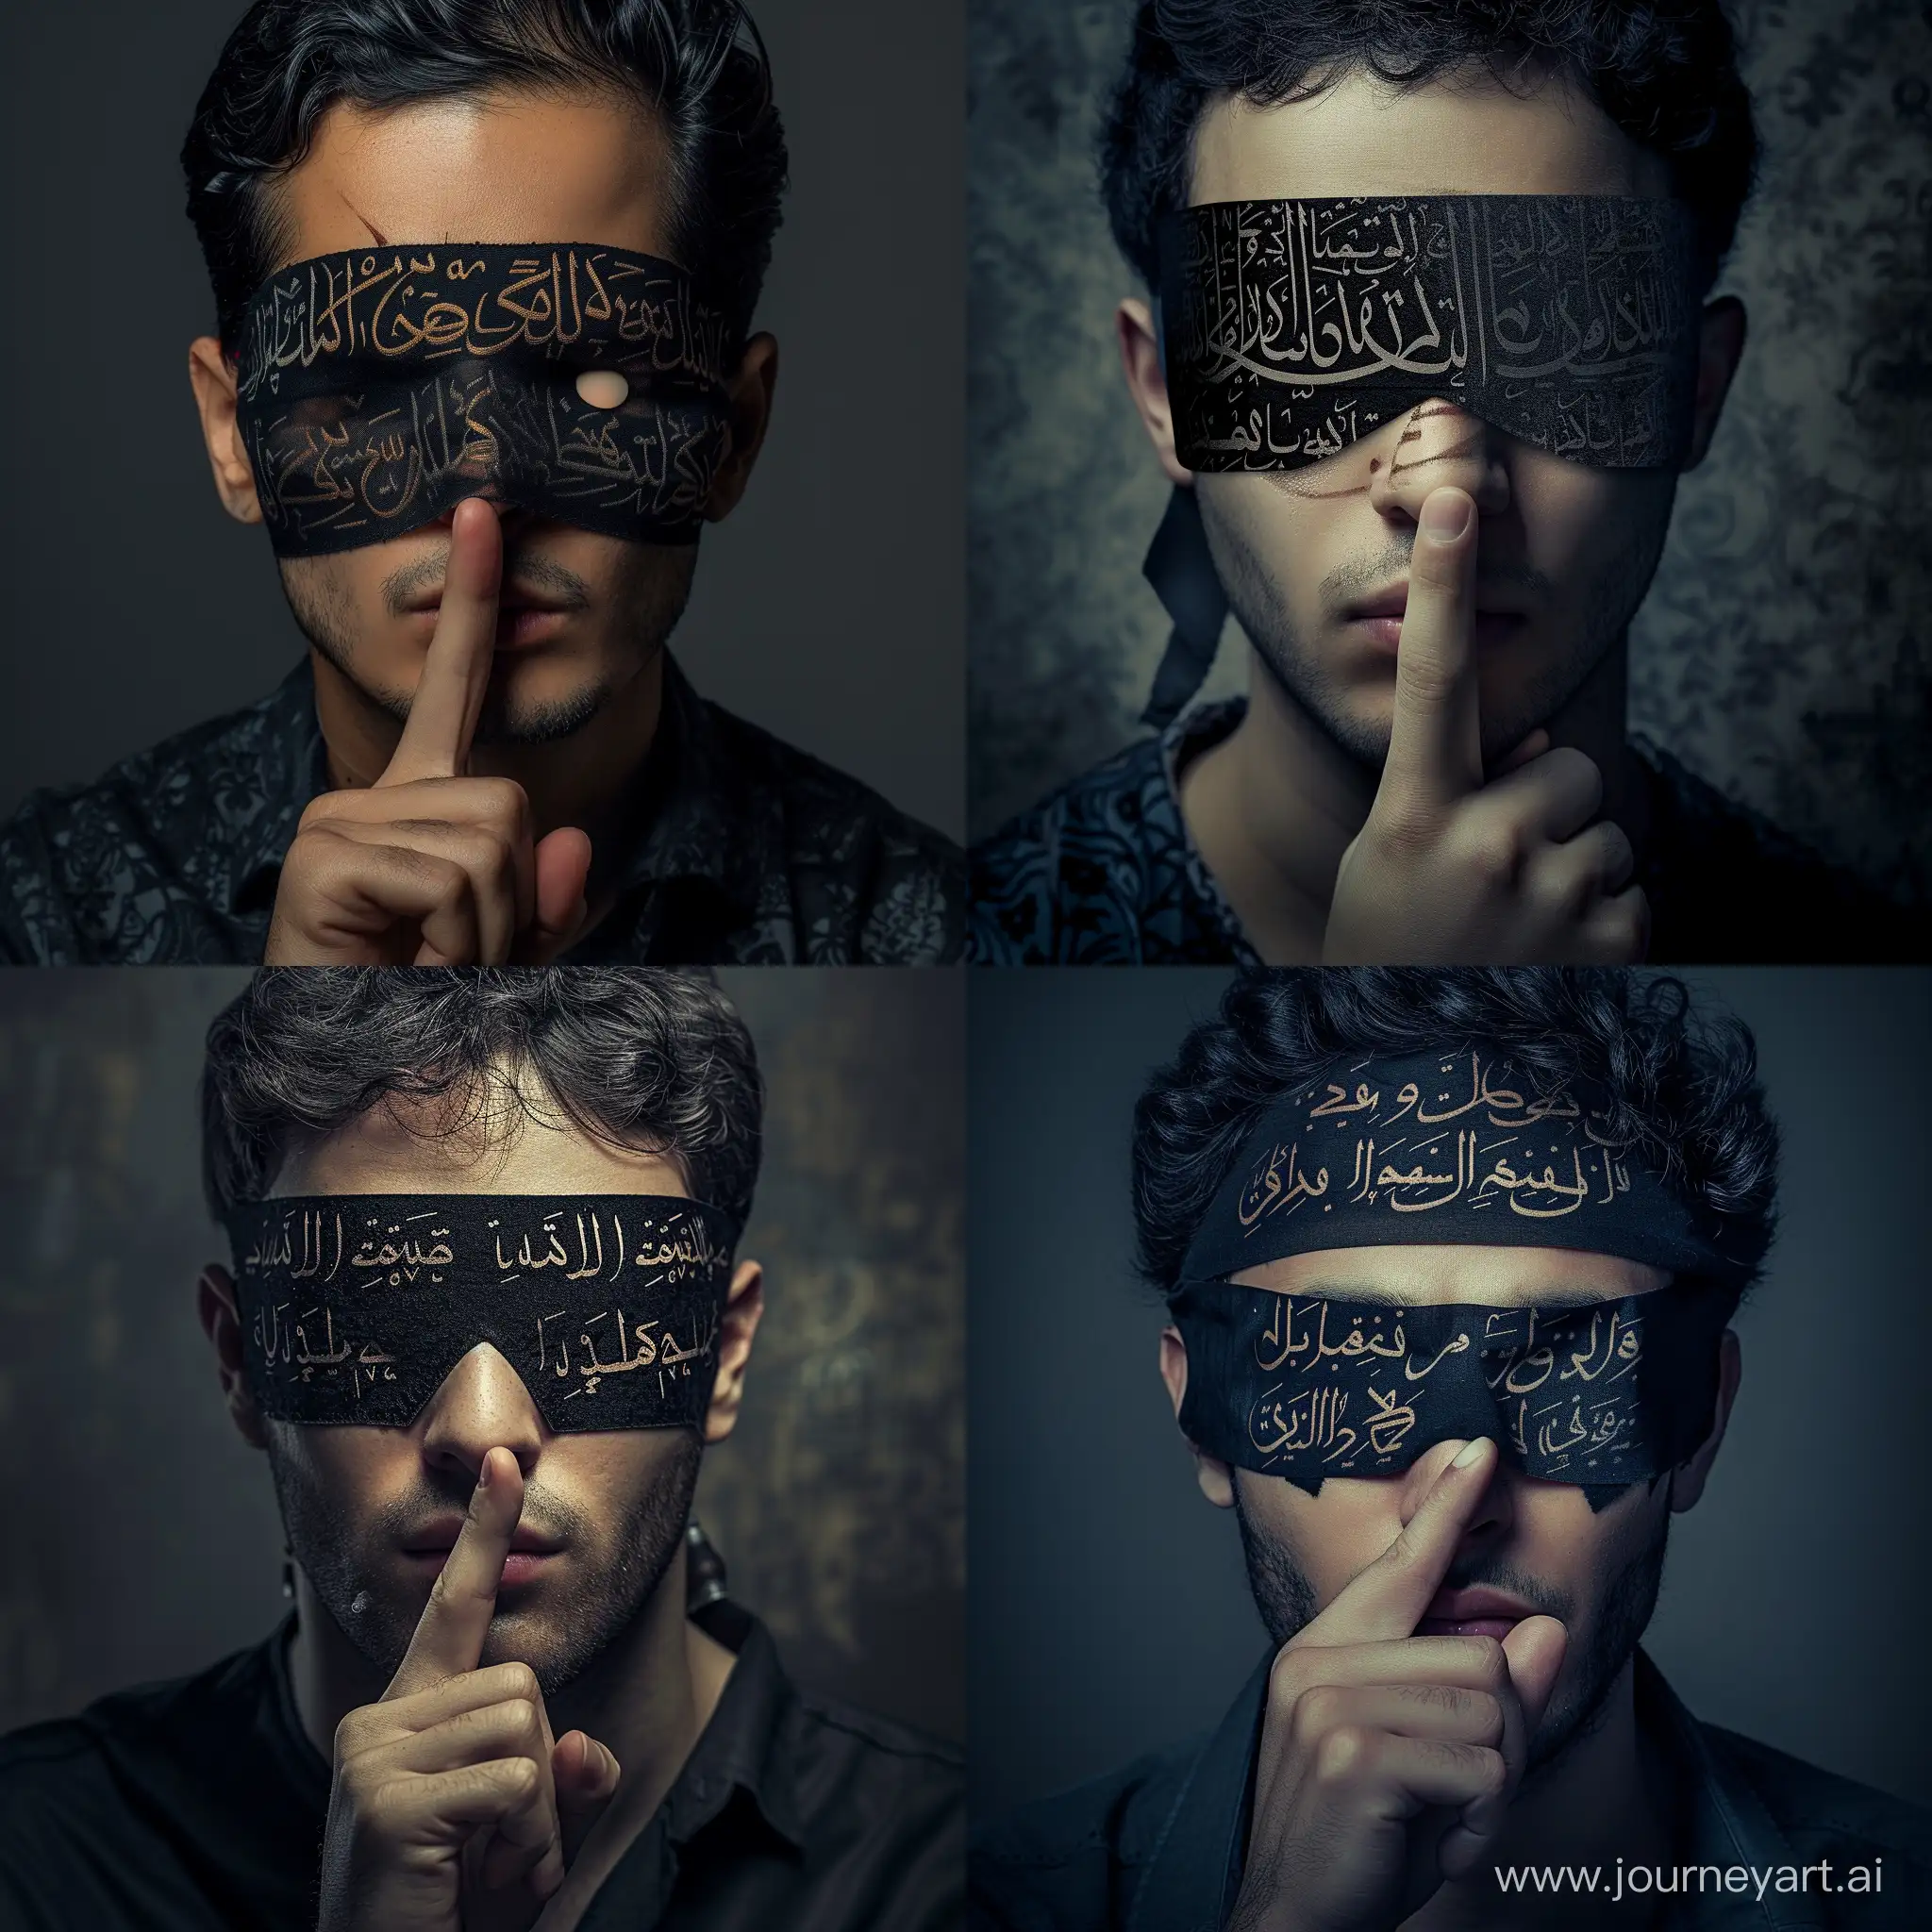 Mysterious-Man-with-Silent-Secrets-Surreal-ArabicInspired-Imagery